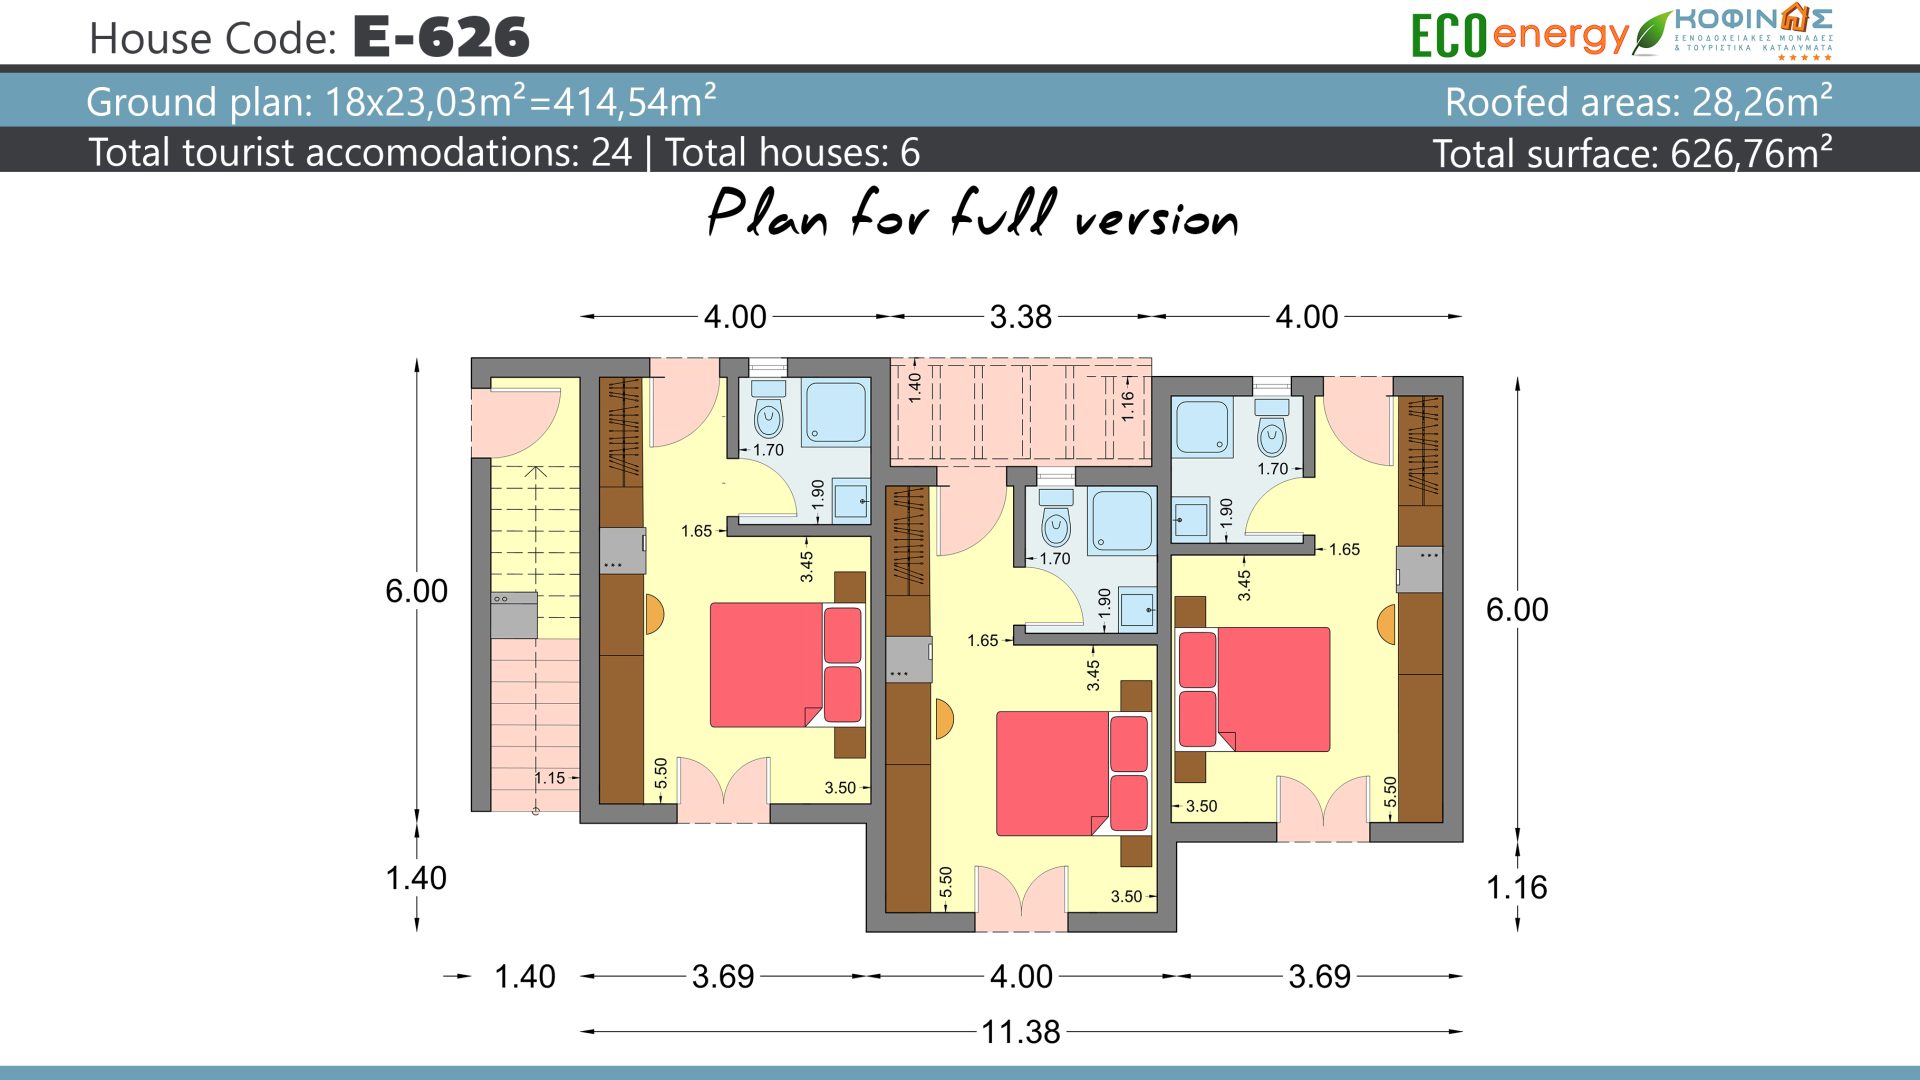 House complex E-626, total surface of (18×23,03)+(6×35.37) = 626,75m²,covered areas 28,26 m², balconies 214,14 m²